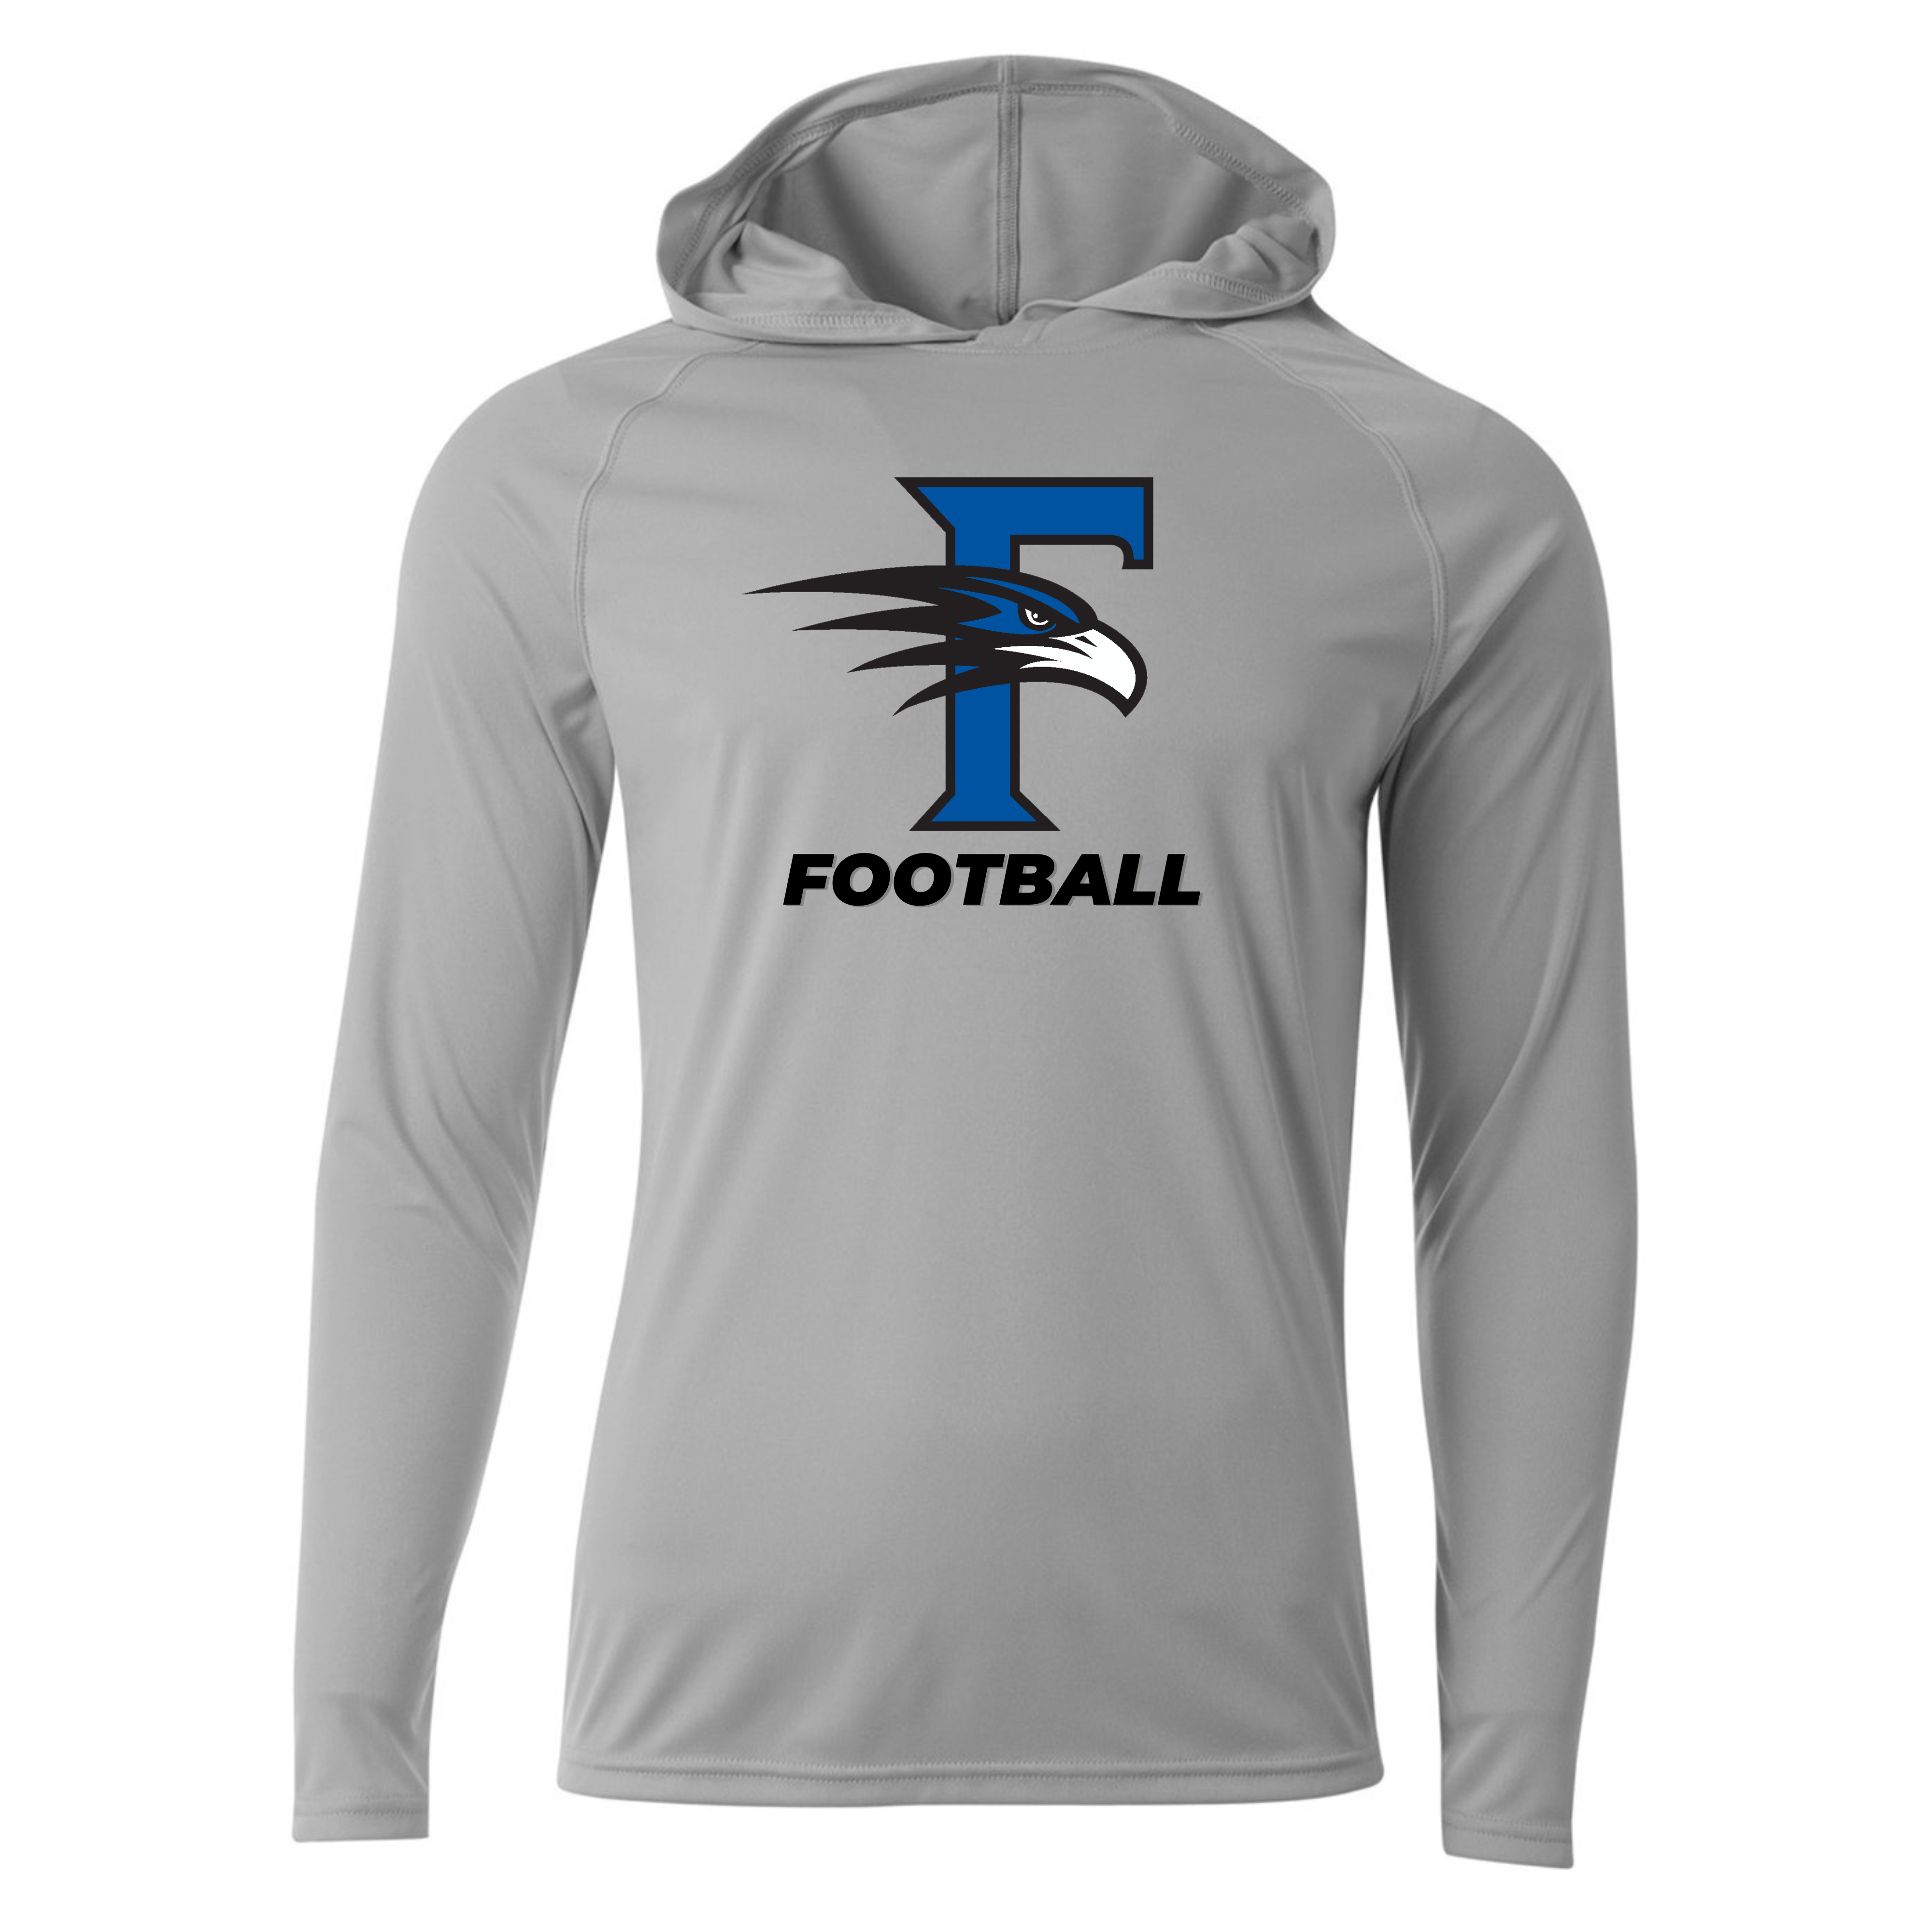 Florence Recreation Football Cooling Performance Long-Sleeve Hooded Silver T-shirt- N3409